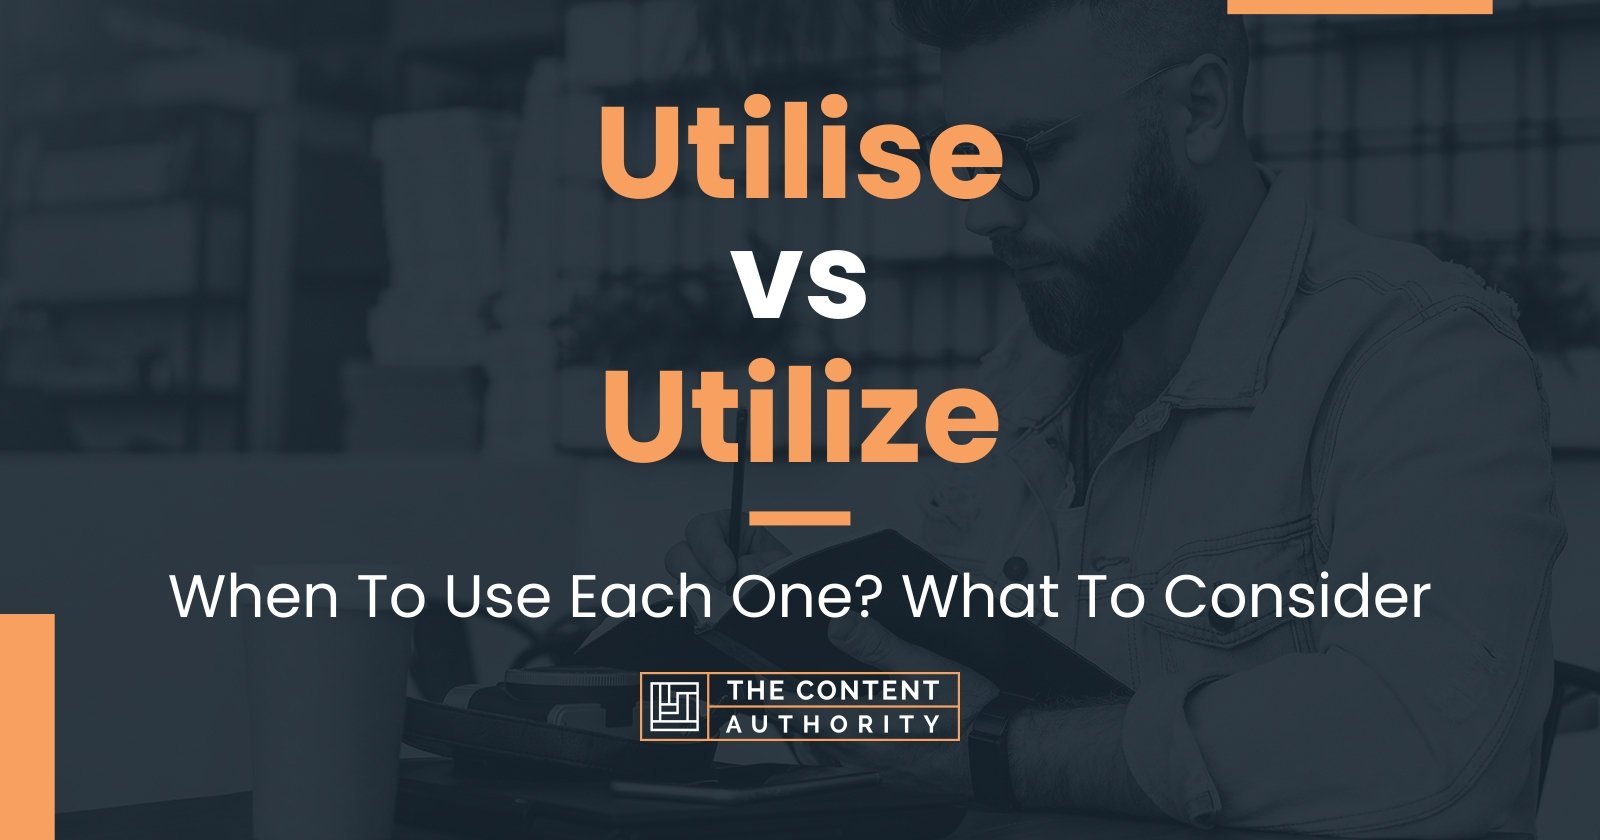 Utilise vs Utilize: When To Use Each One? What To Consider